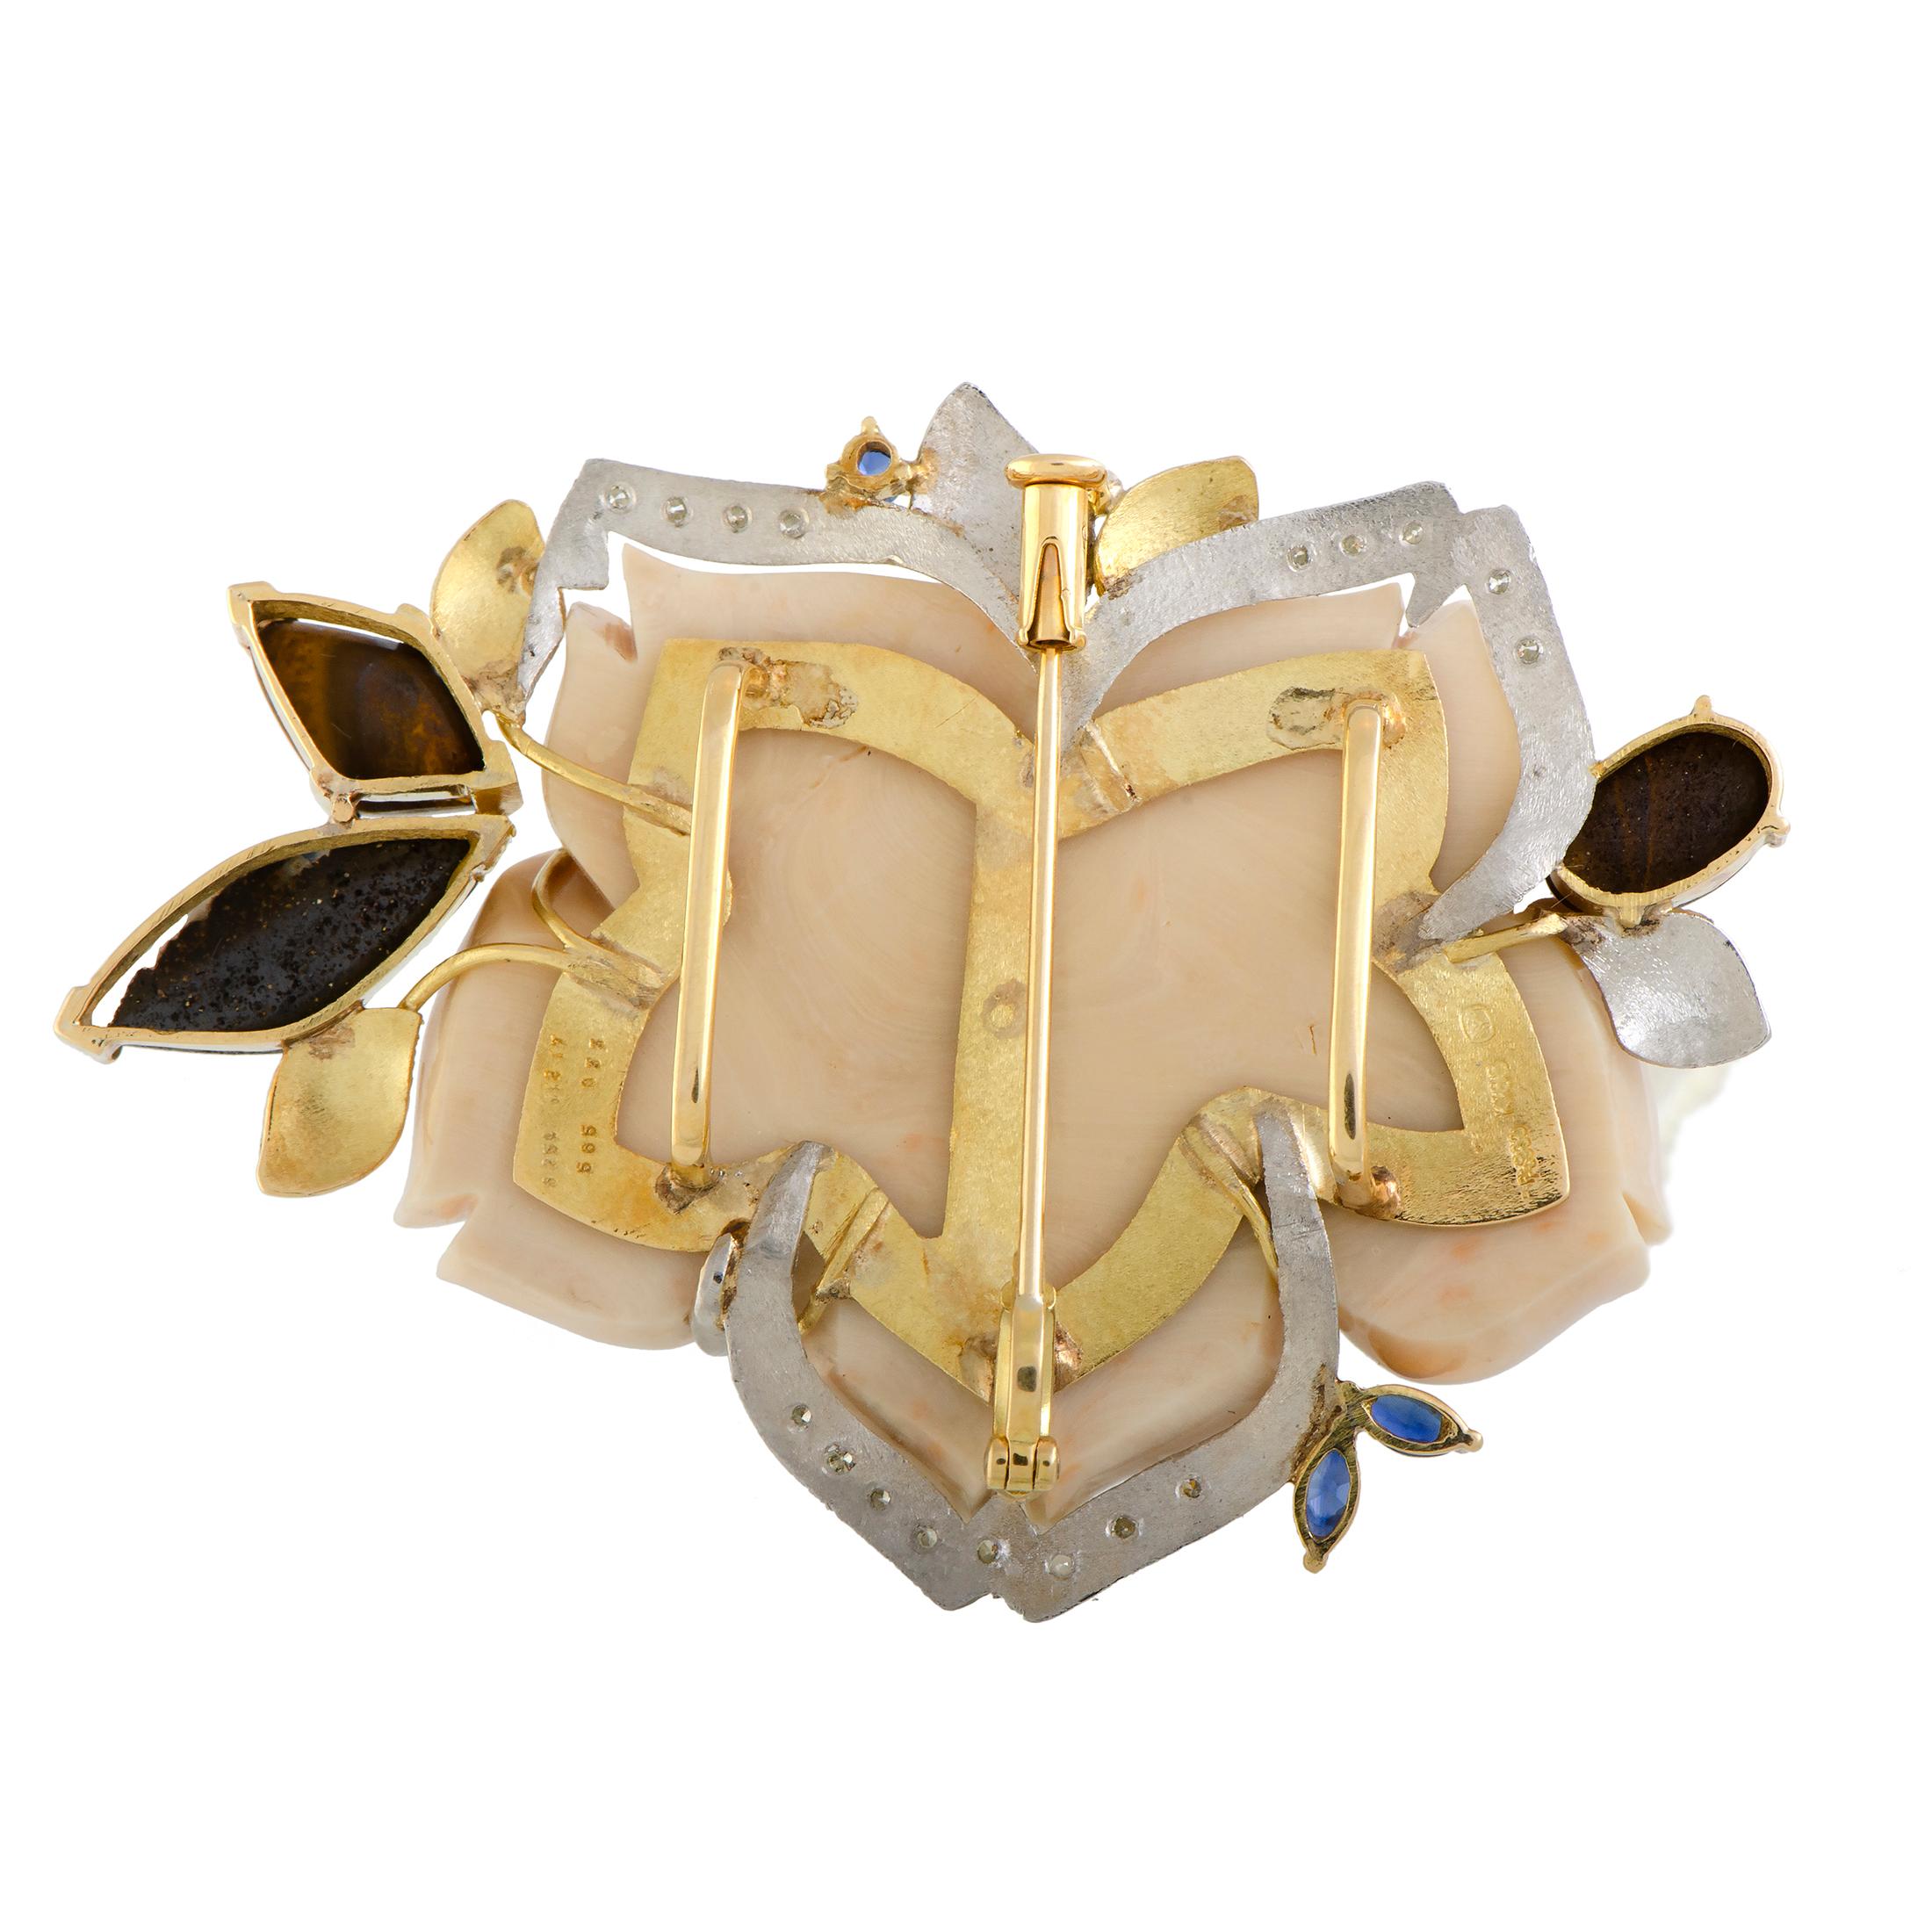 Beautifully designed to depict a delightful flower in a stunningly fashionable manner, this attractive brooch is a definite head-turner that will make any outfit of yours a standout ensemble. The brooch is expertly crafted from platinum and 18K